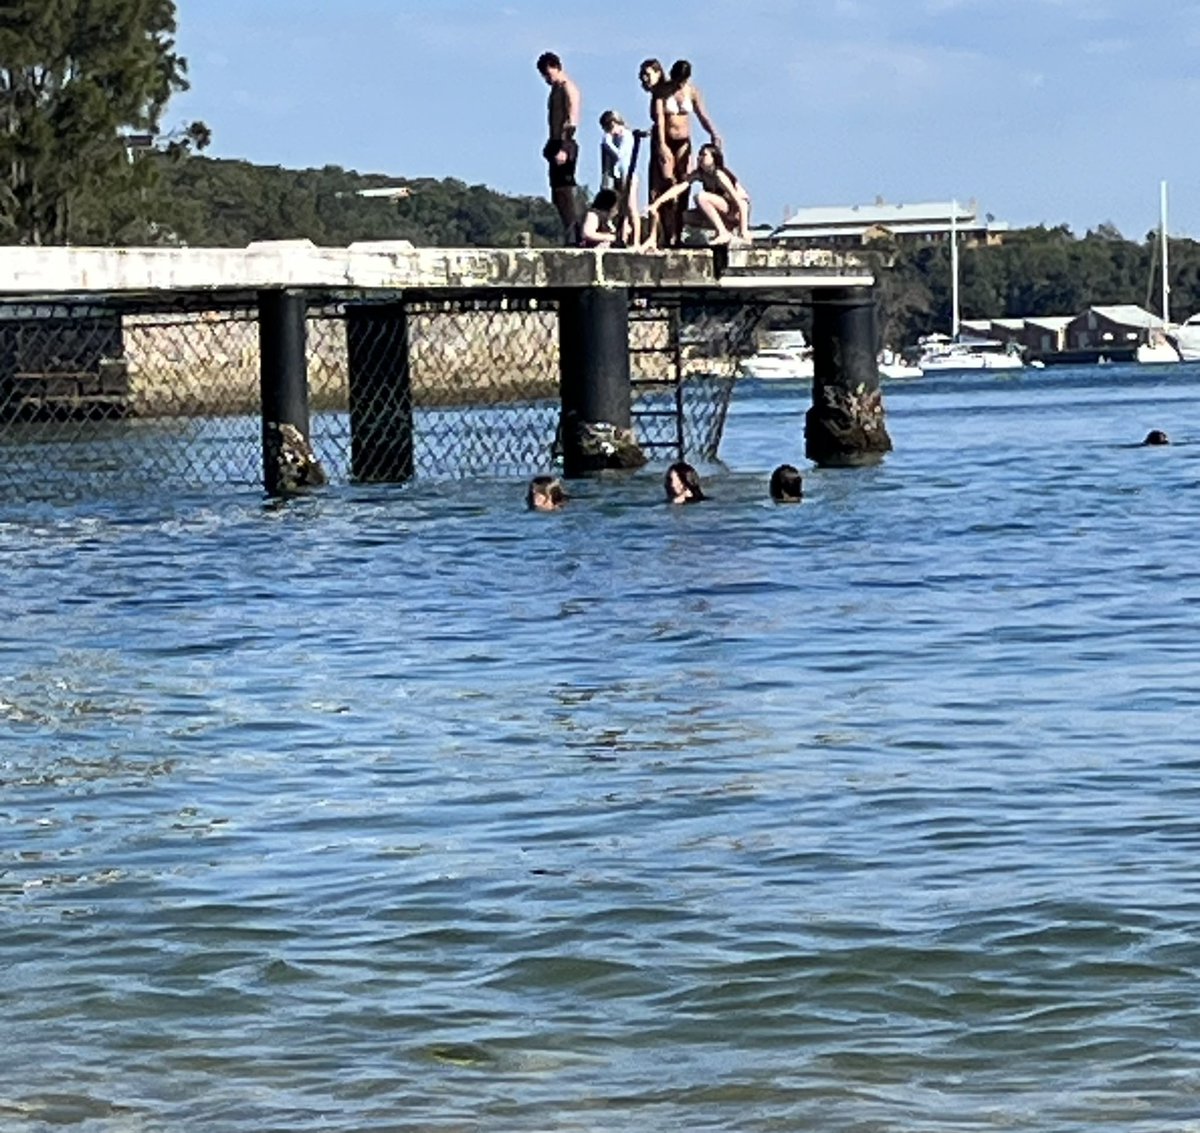 Standing tall at Little Manly.
Yet another off Sydney’s galaxy of swimming spots to enjoy in this warm autumn.
Compactly combines beach, pool, grassed area & modest cafe & amenities, with housing all close by. Old Gasworks park up on the headland
#publicsydney